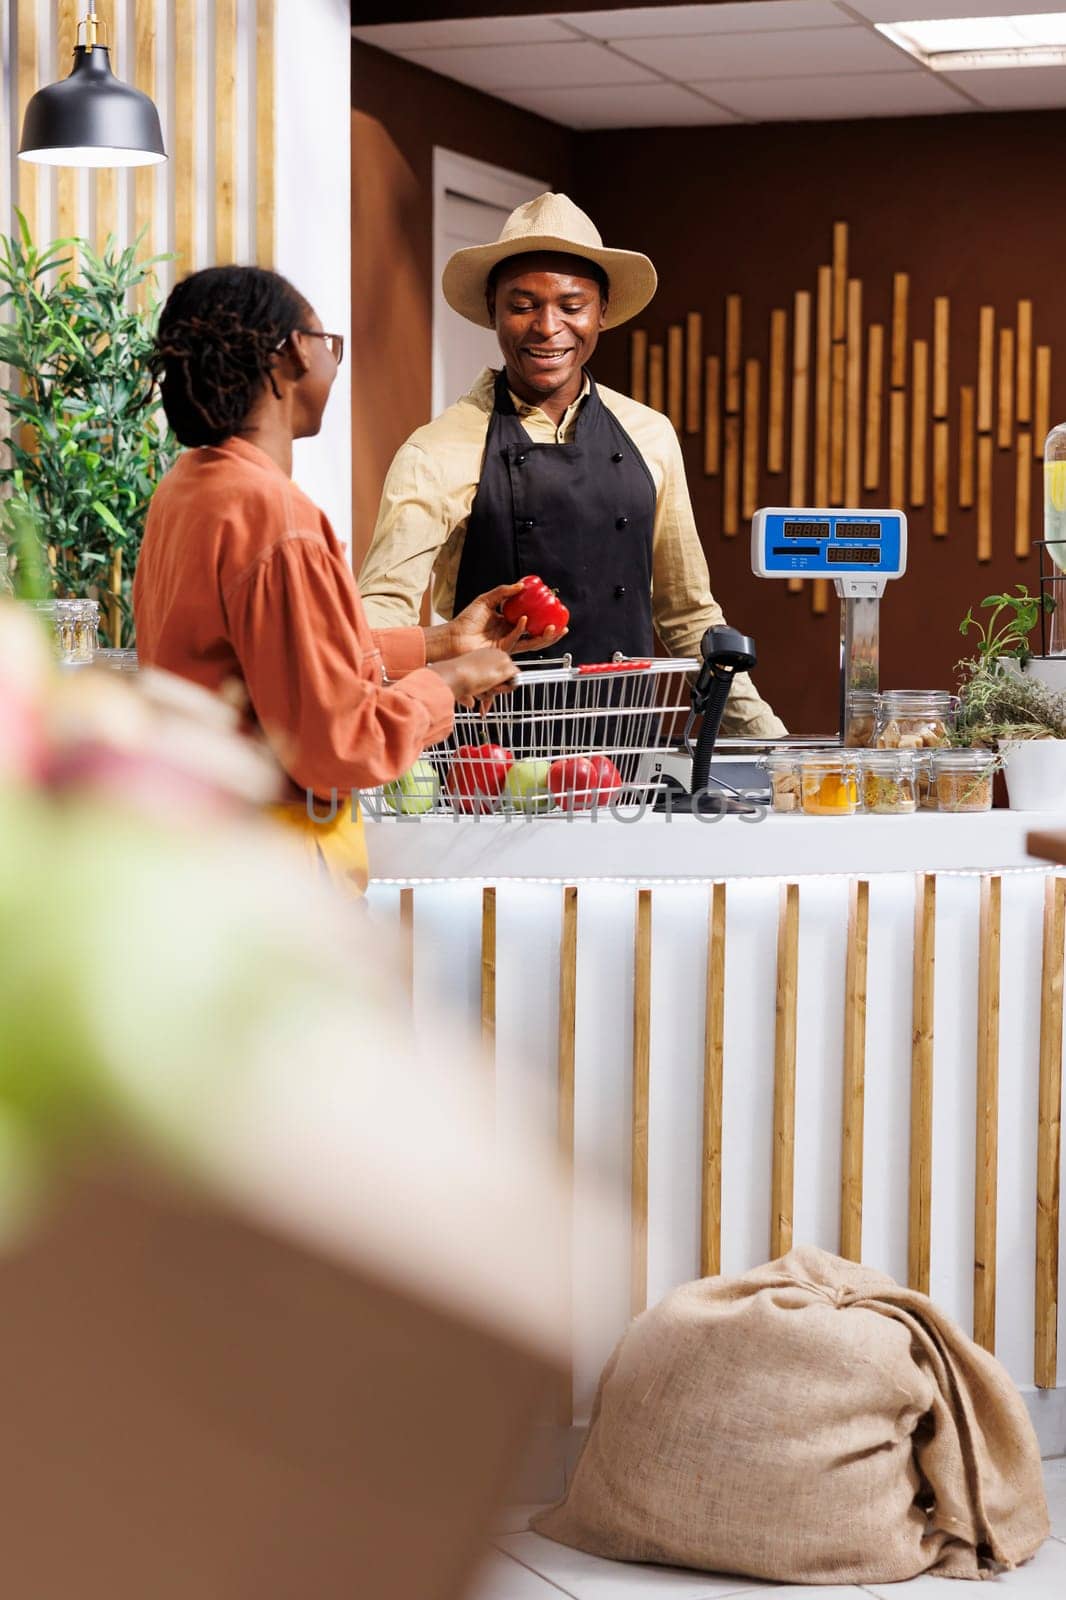 Black woman receives warm assistance from a male vendor while shopping for fresh fruits. The shopkeeper offers variety of vibrant and healthy fruit options, creating positive shopping experience.